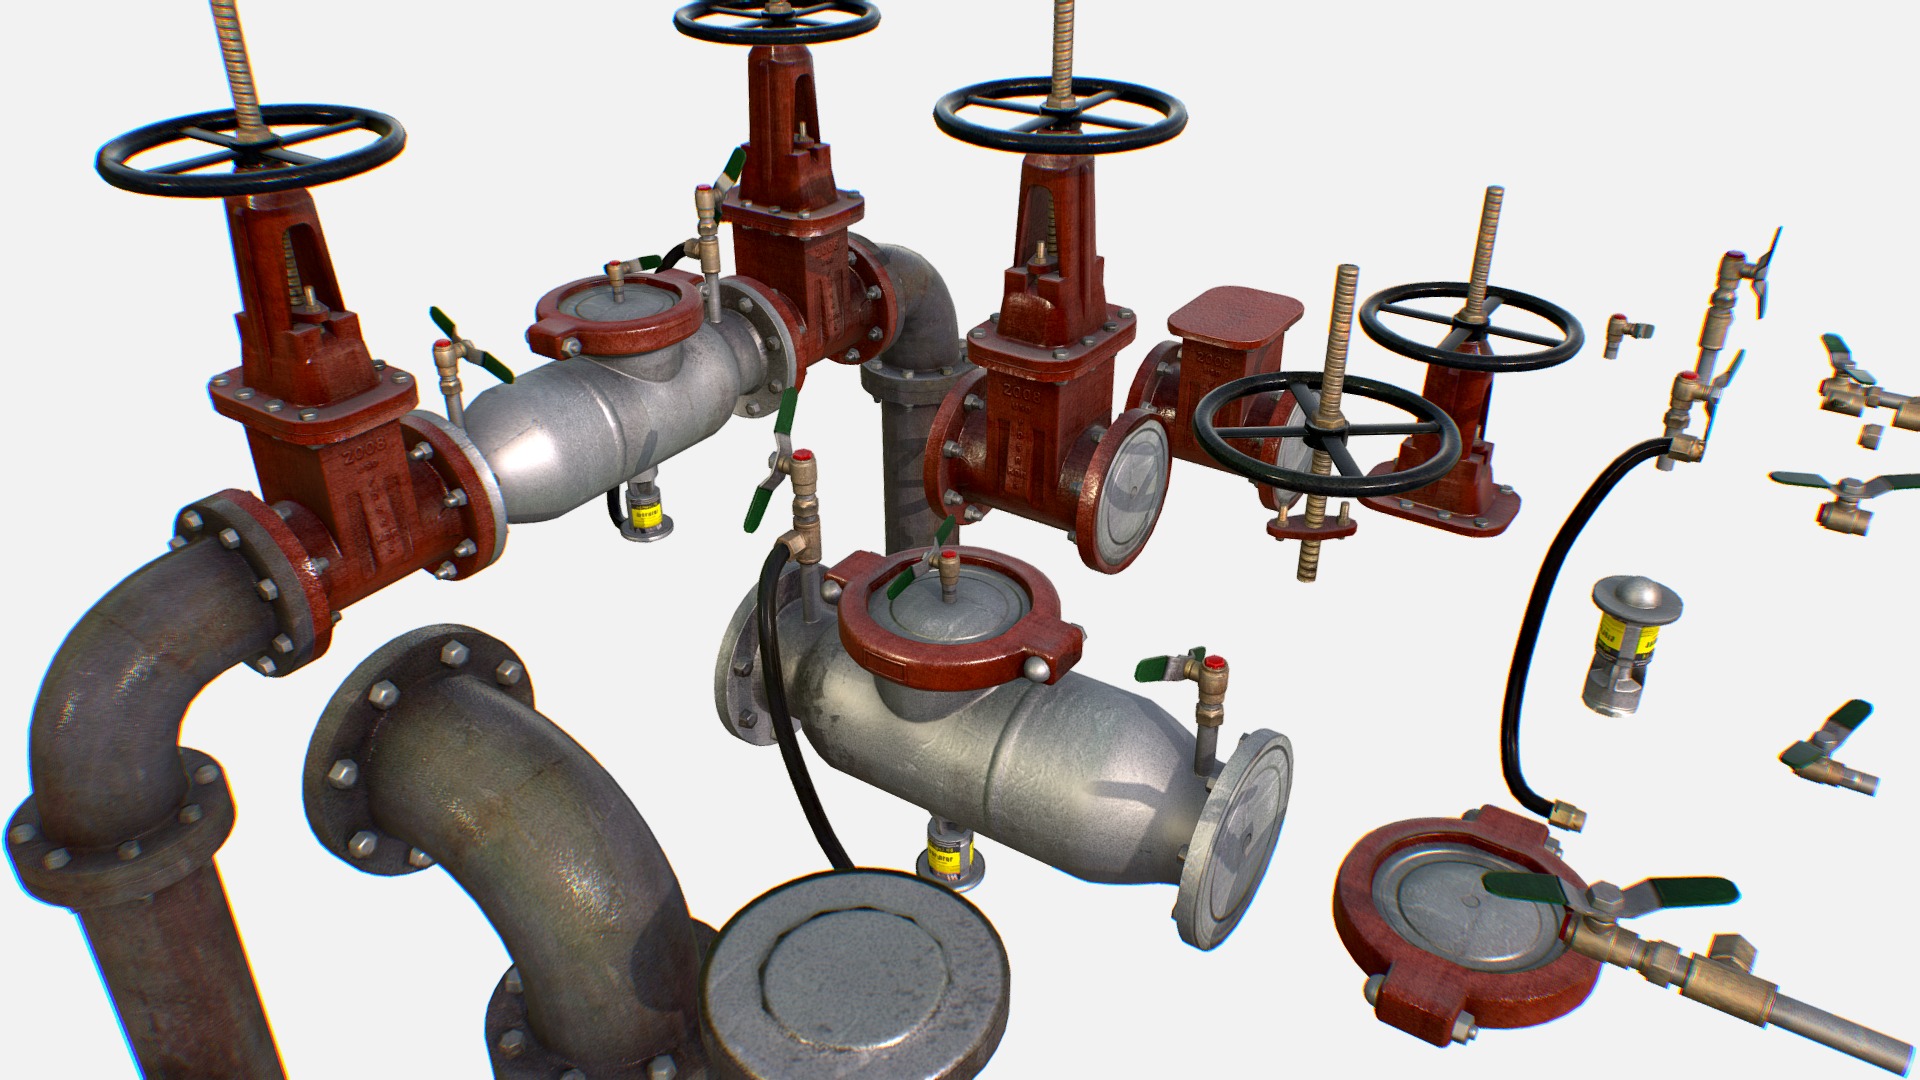 3D model Low Poly Game Backflow Water Pipe Constructor - This is a 3D model of the Low Poly Game Backflow Water Pipe Constructor. The 3D model is about a group of mechanical objects.